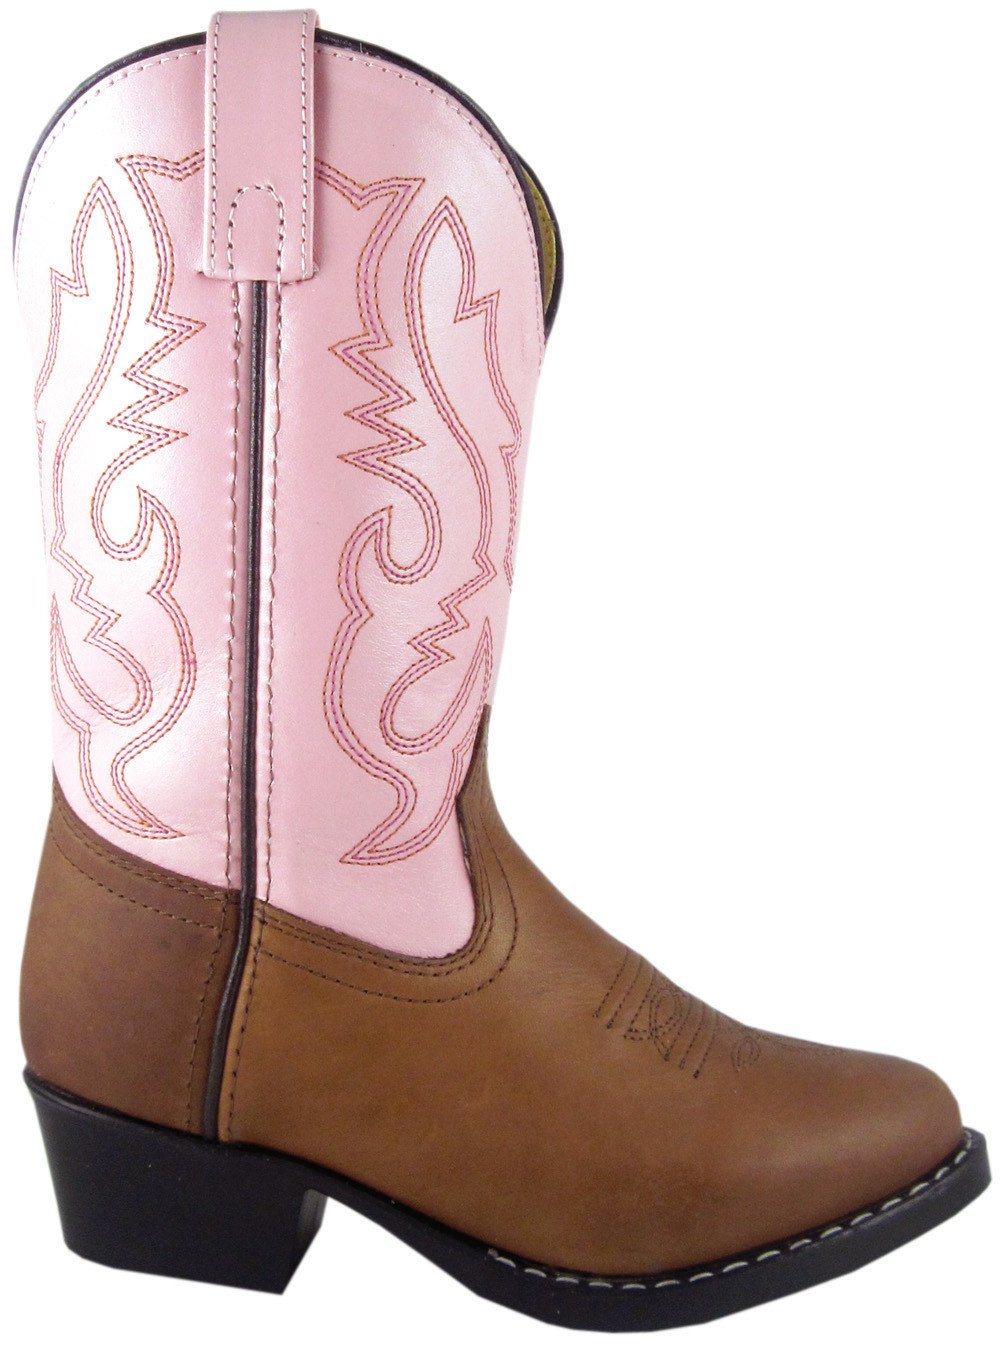 Children's Smoky Mountain Denver Leather Boot in Brown/Pink